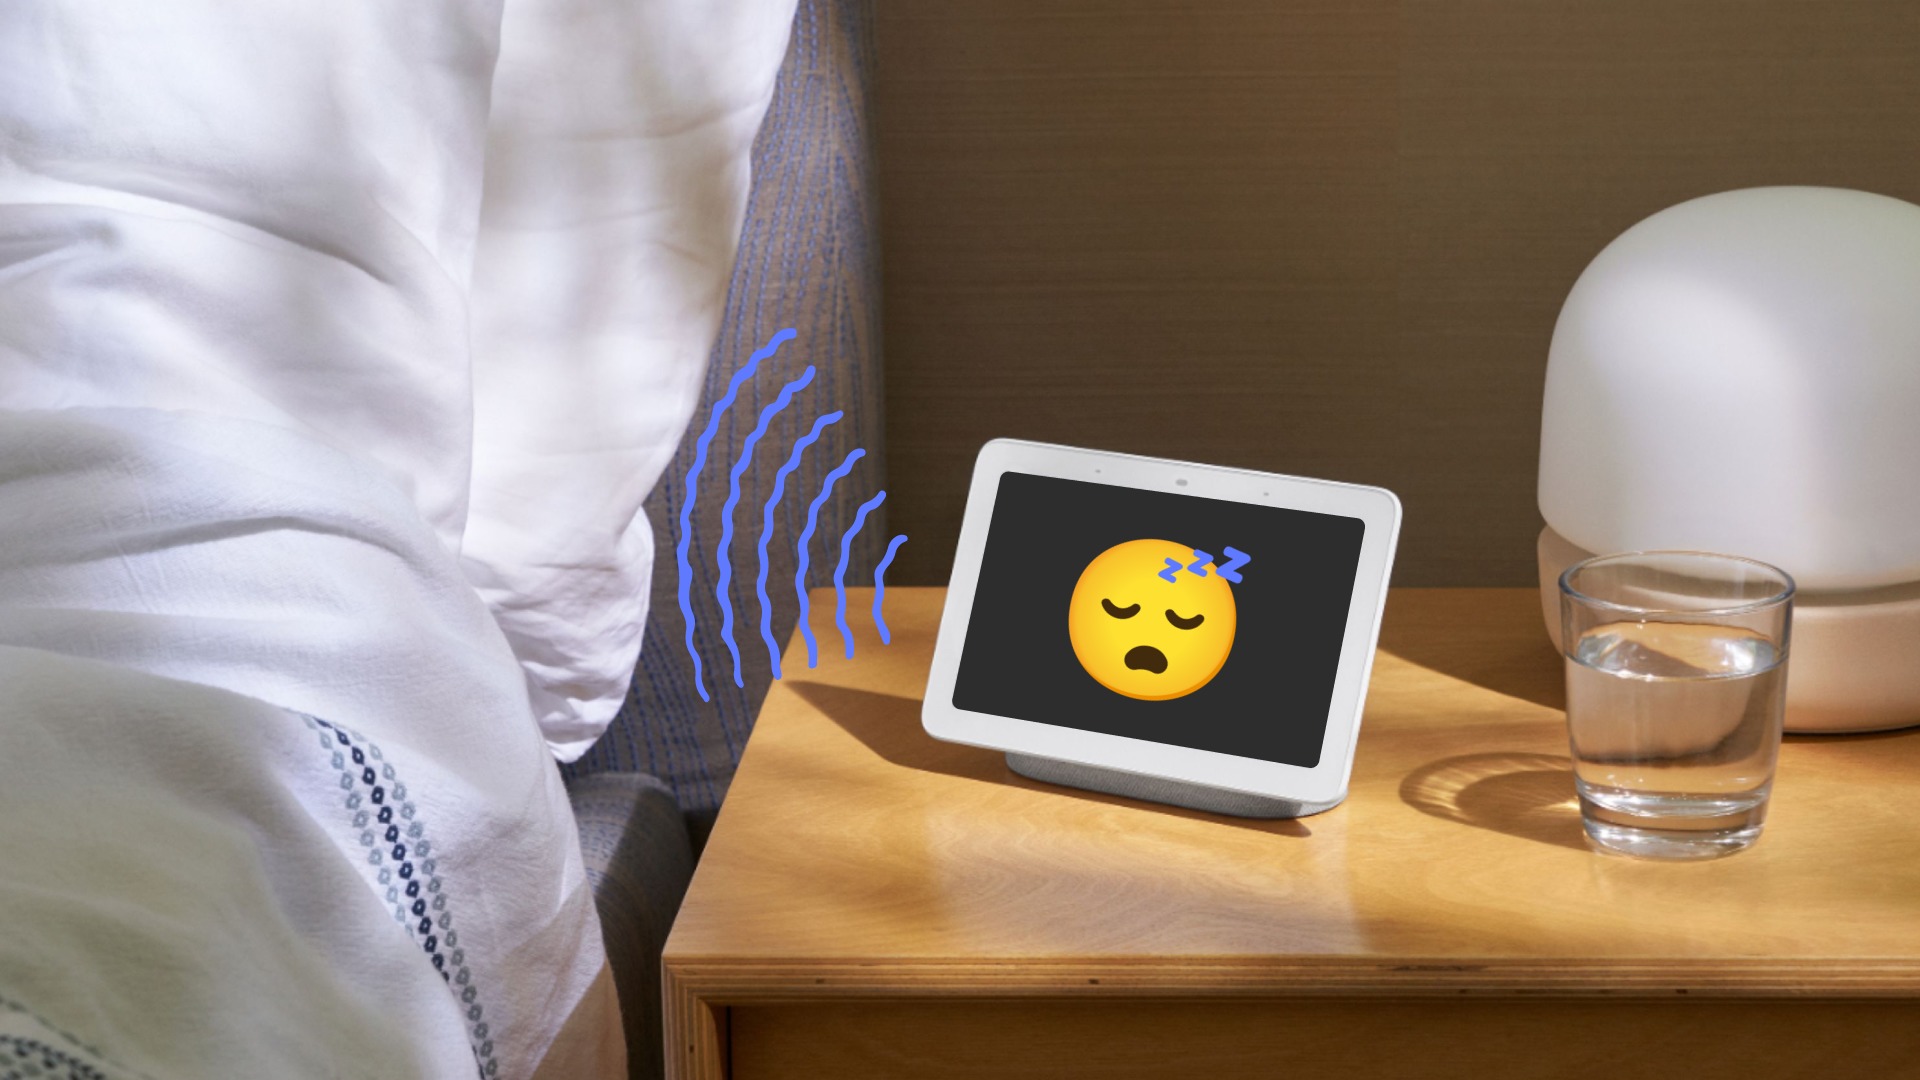 Google to release new Nest Hub in 2021 that utilizes Soli for sleep tracking